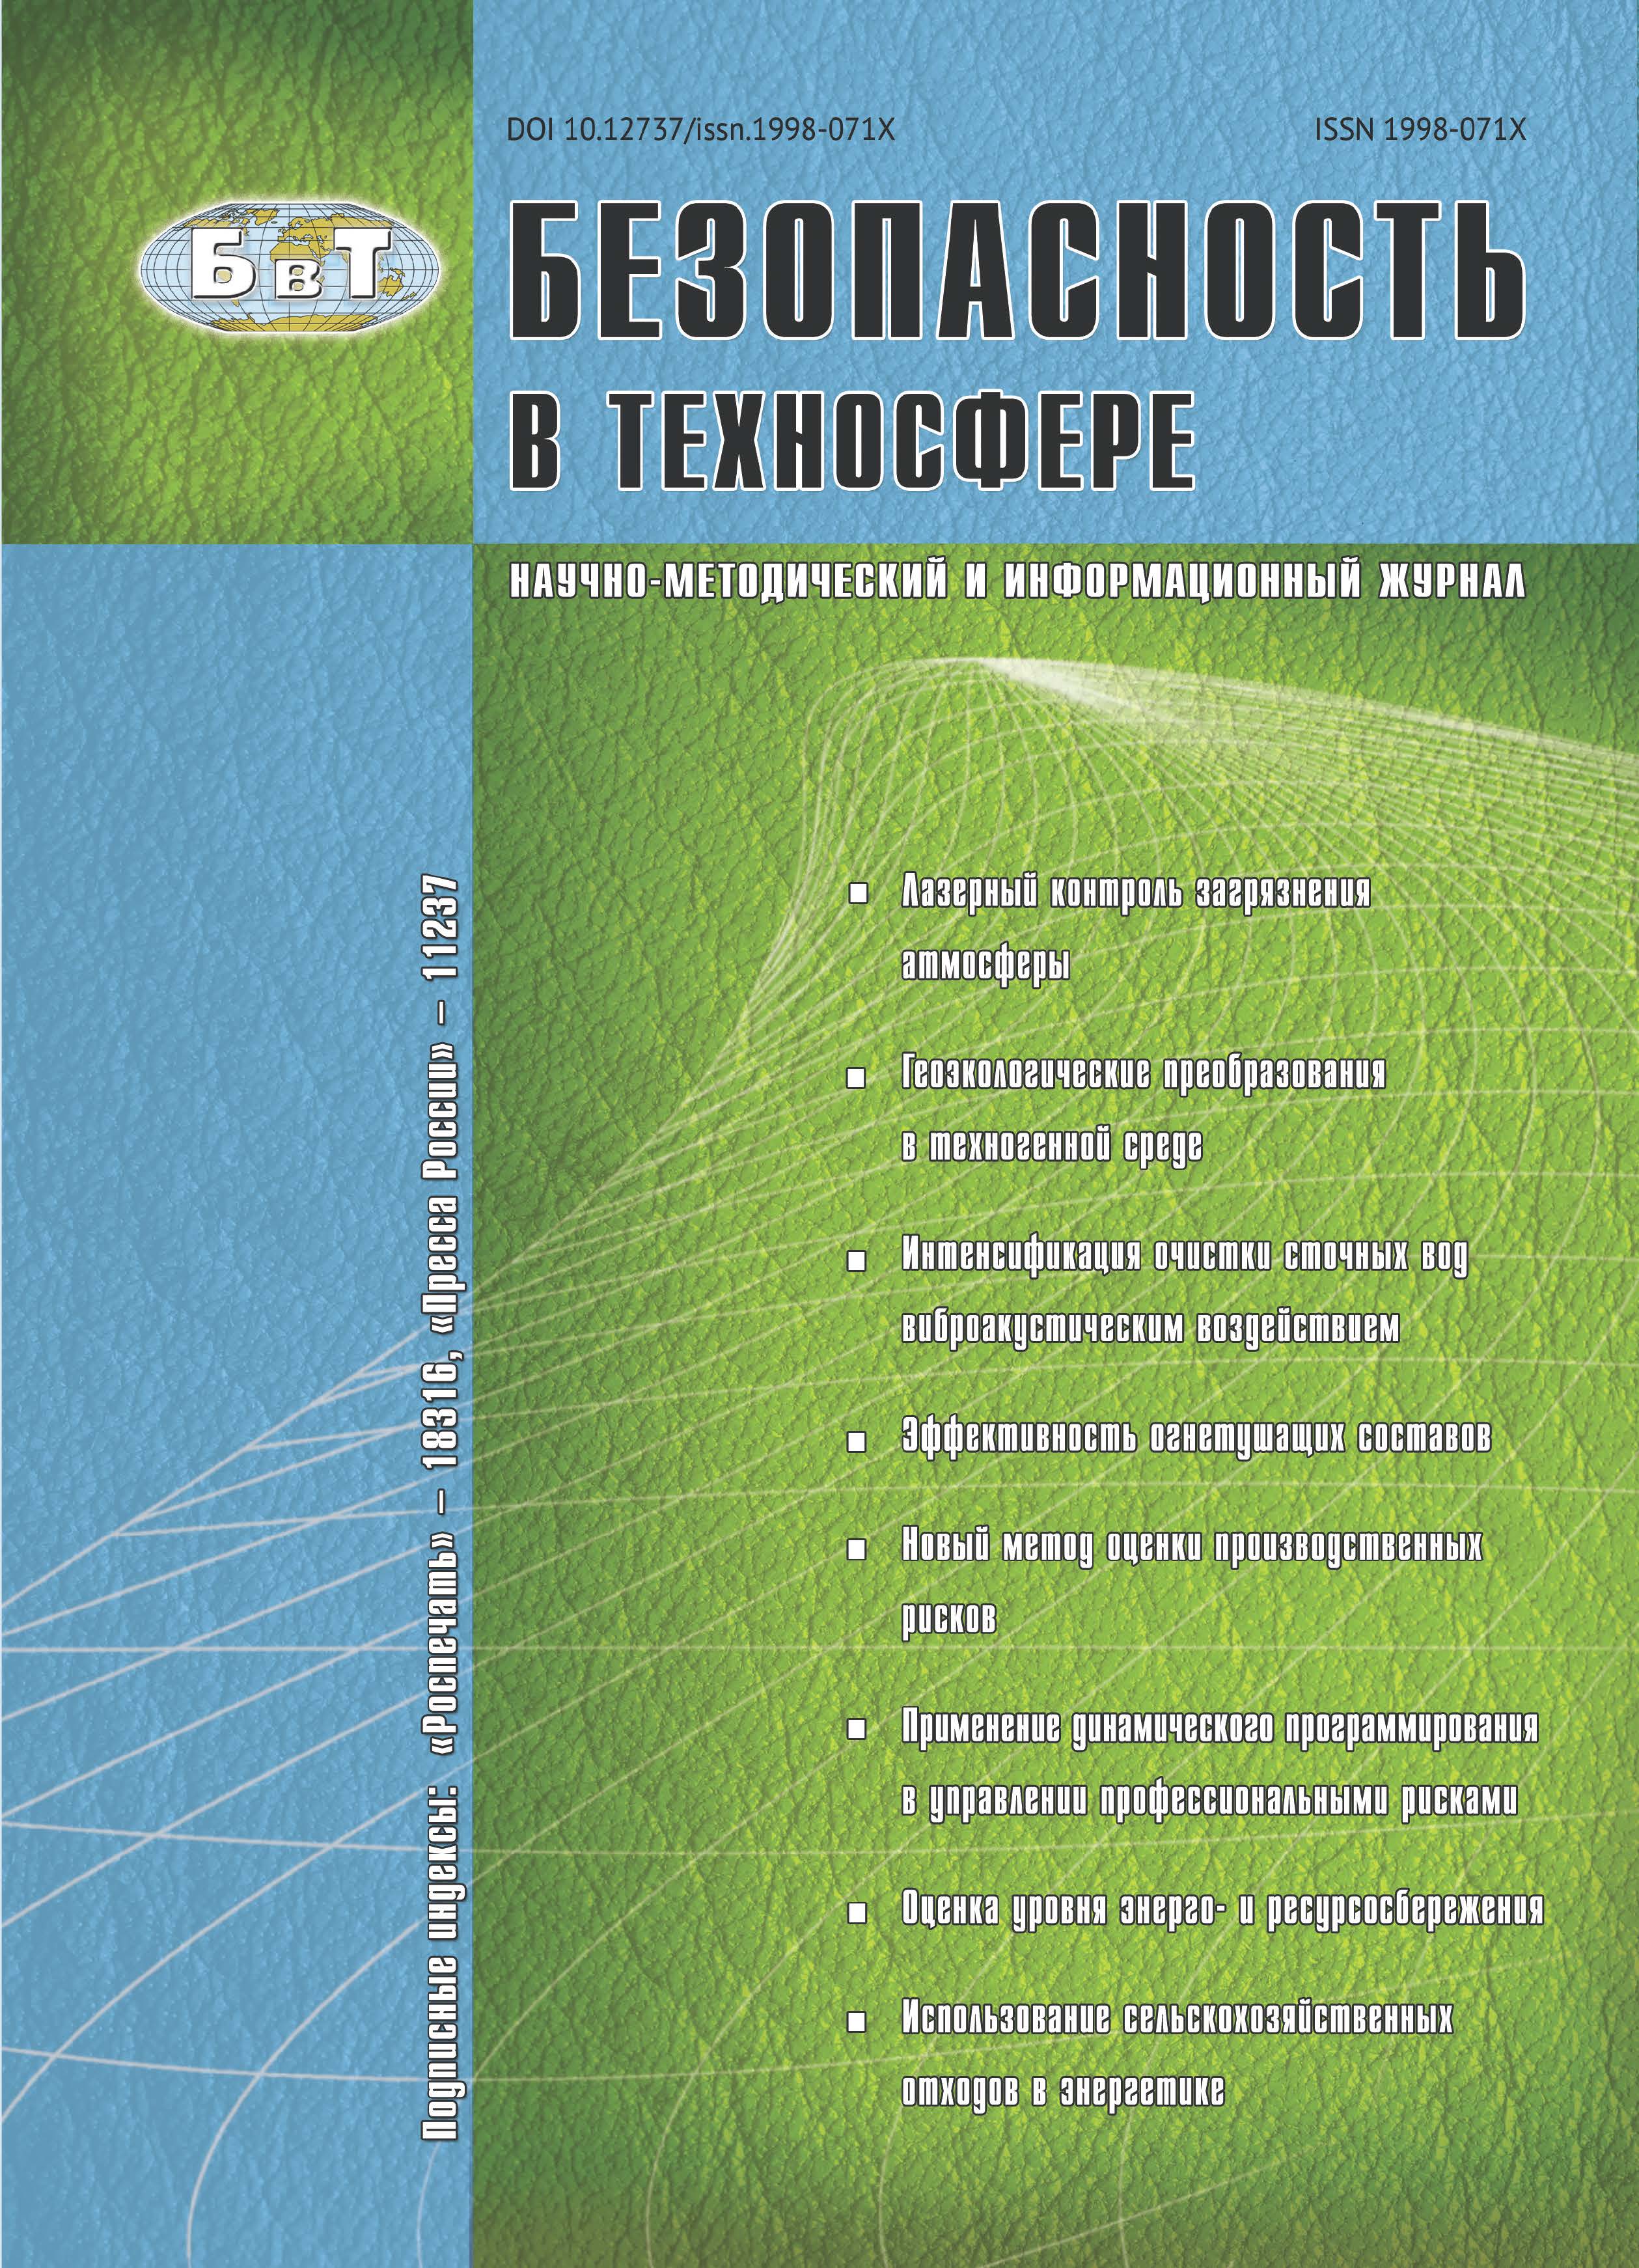                         Federal Educational and Methodological Association "Technosphere Safety and Environmental Engineering": Structure, Organization of Work and Tasks
            